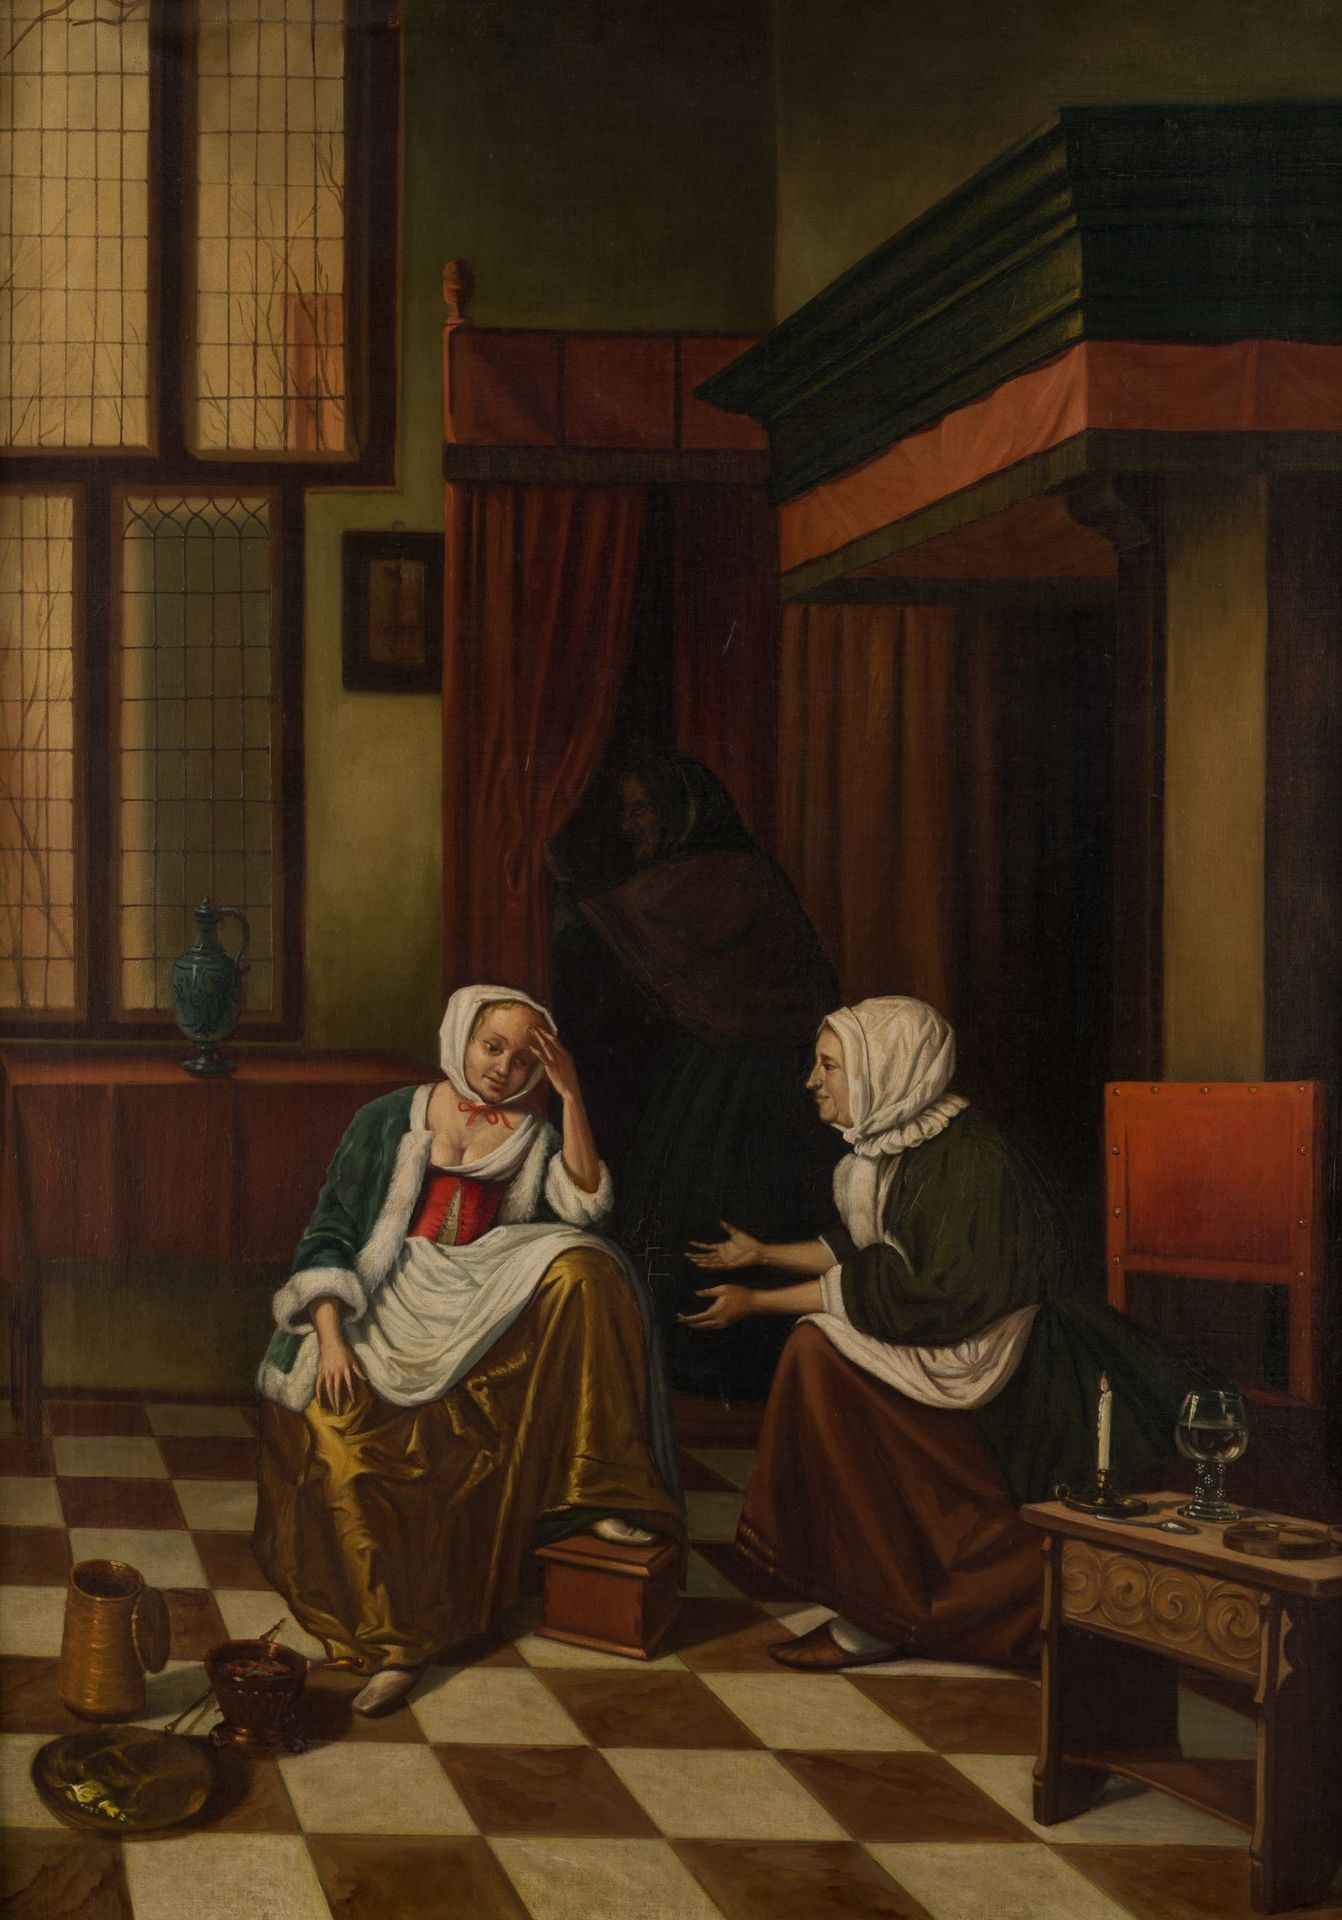 ANONYMOUS ( / Earlies C.20th) "Interior with sick maiden" Opera che copia modell&hellip;